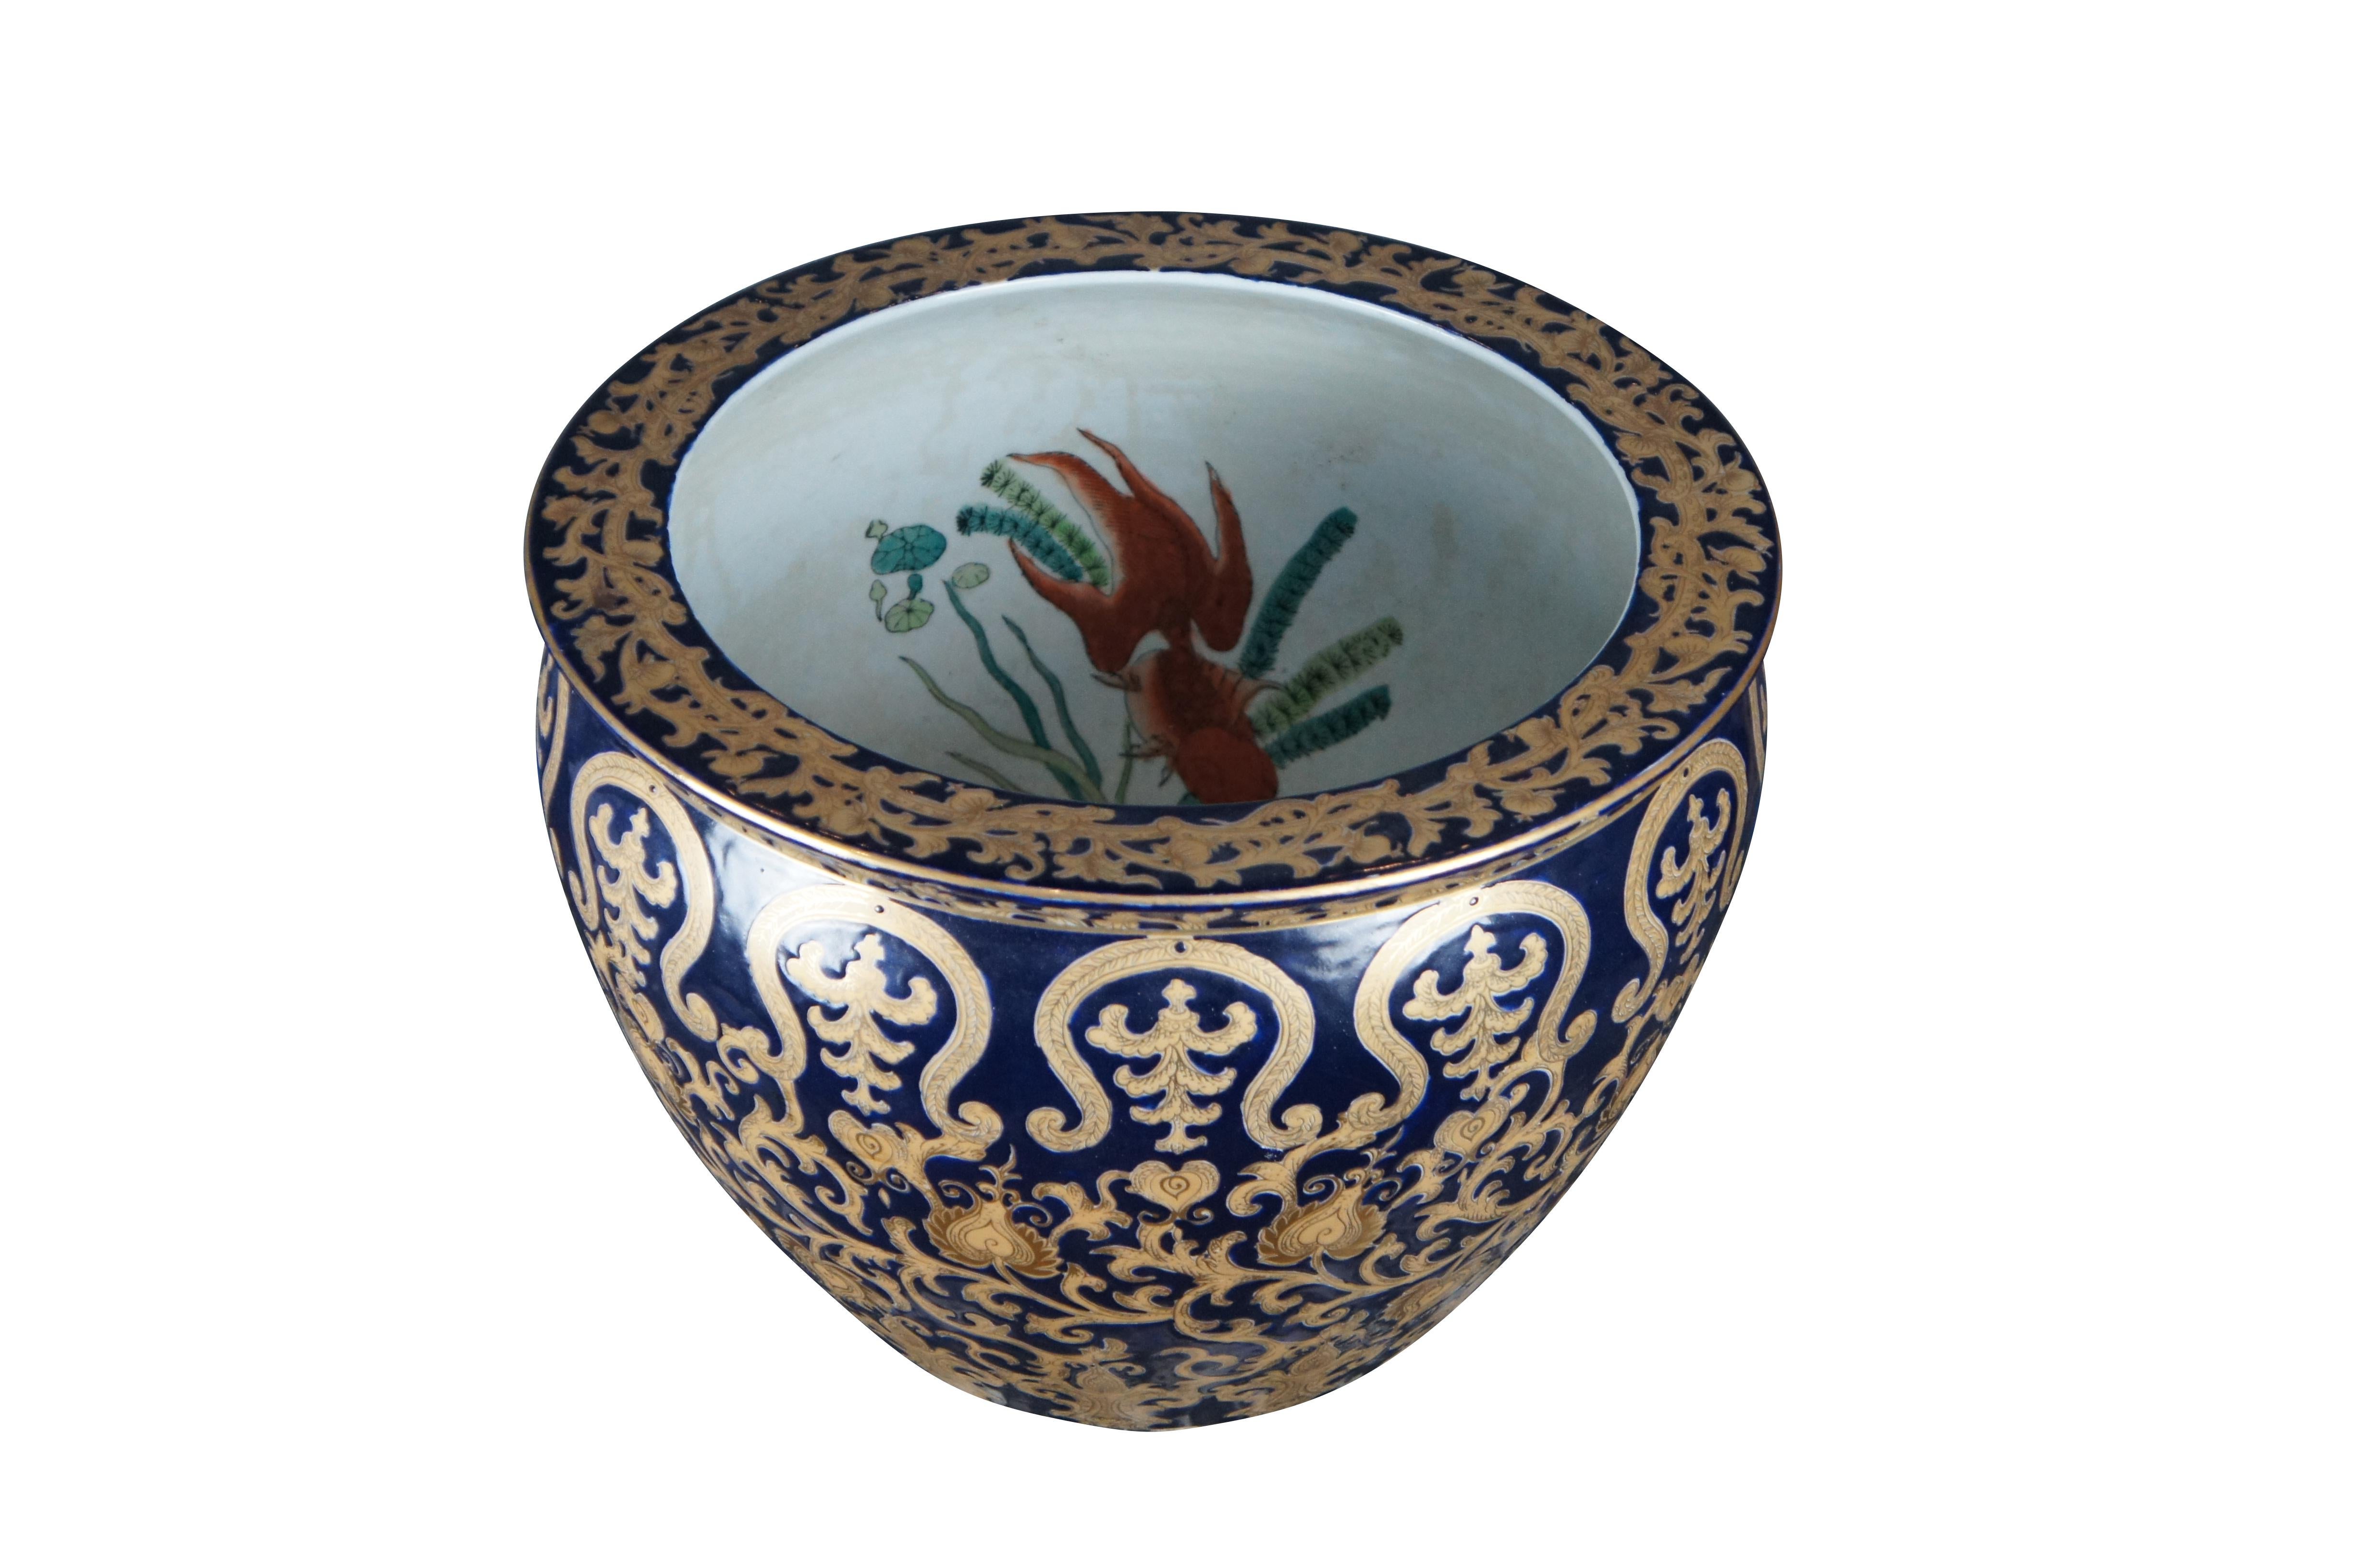 Large 20th Century Chinese porcelain fishbowl Cache Pot in navy with 24-karet gold scrolling foliate pattern. Interior is white with koi fish pattern. Stamped along underside.

Dimensions:
15